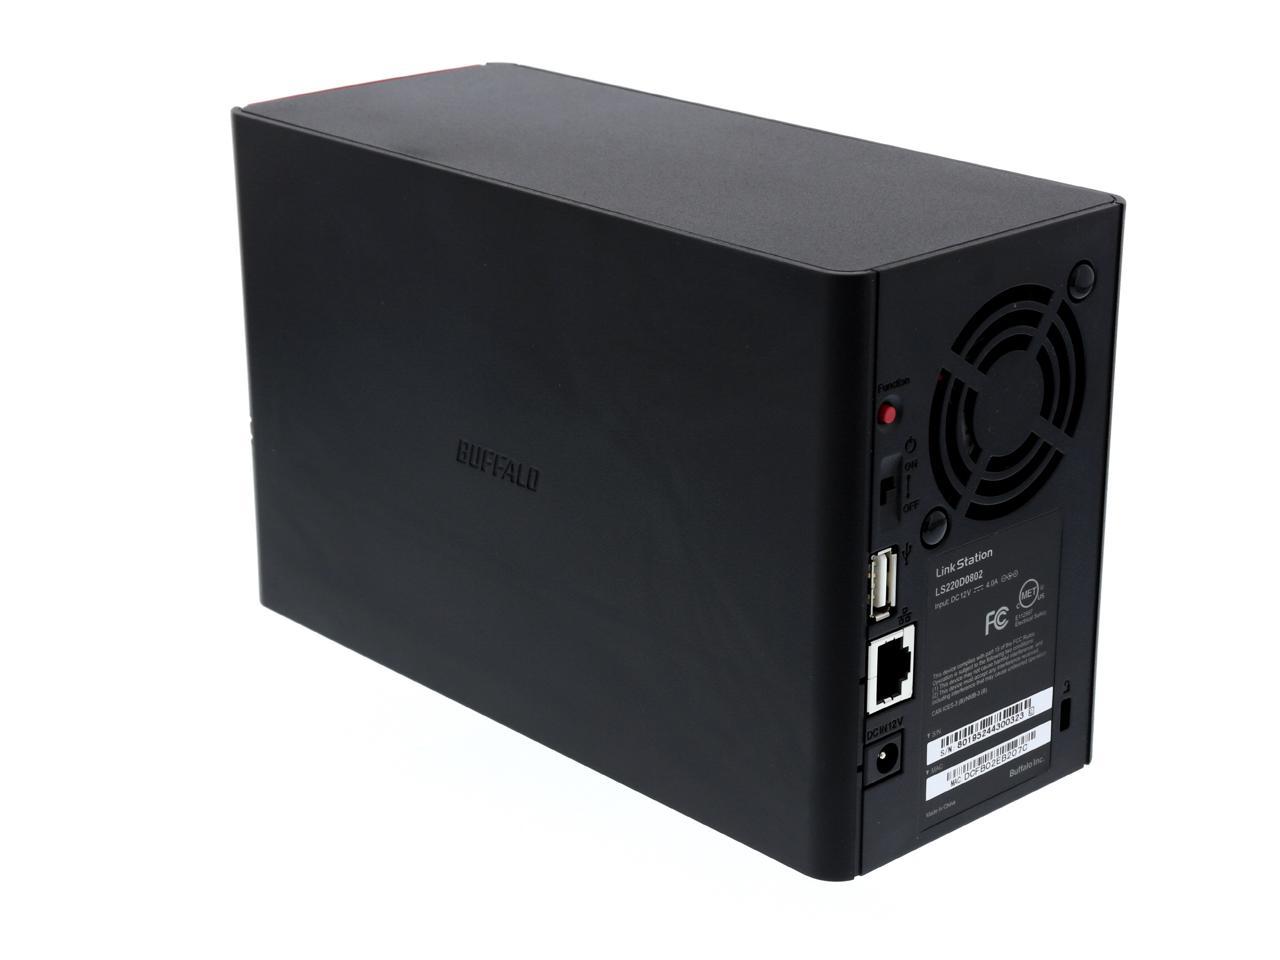 LinkStation 220 8TB Personal Cloud Storage with Drives Included -